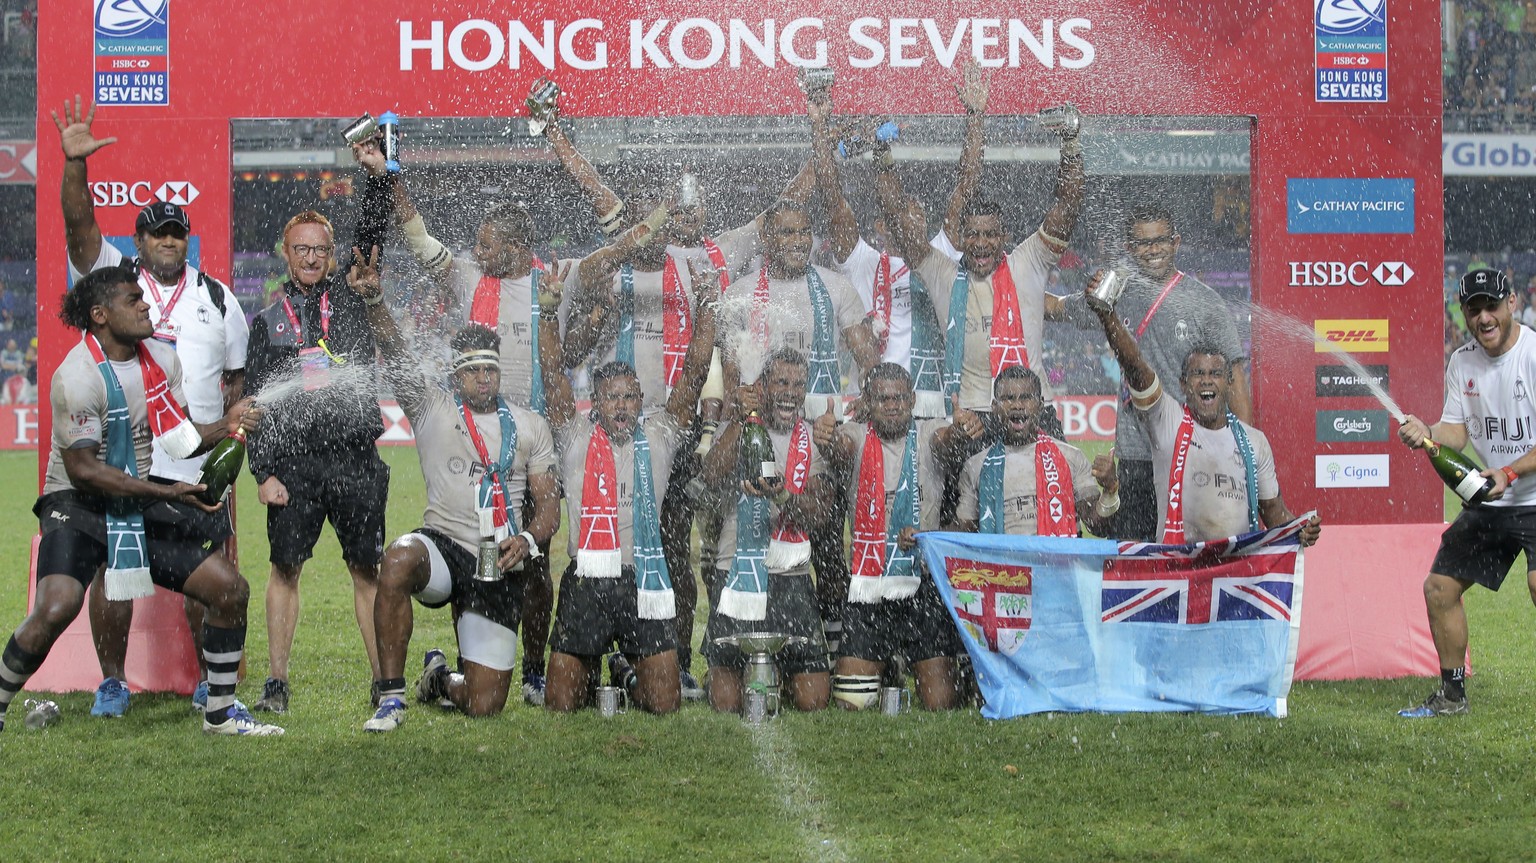 FILE - In this April 10, 2016 file photo, the Fiji rugby team celebrate after winning the final match against New Zealand at the Hong Kong Sevens rugby tournament in Hong Kong. Rugby is returning to t ...